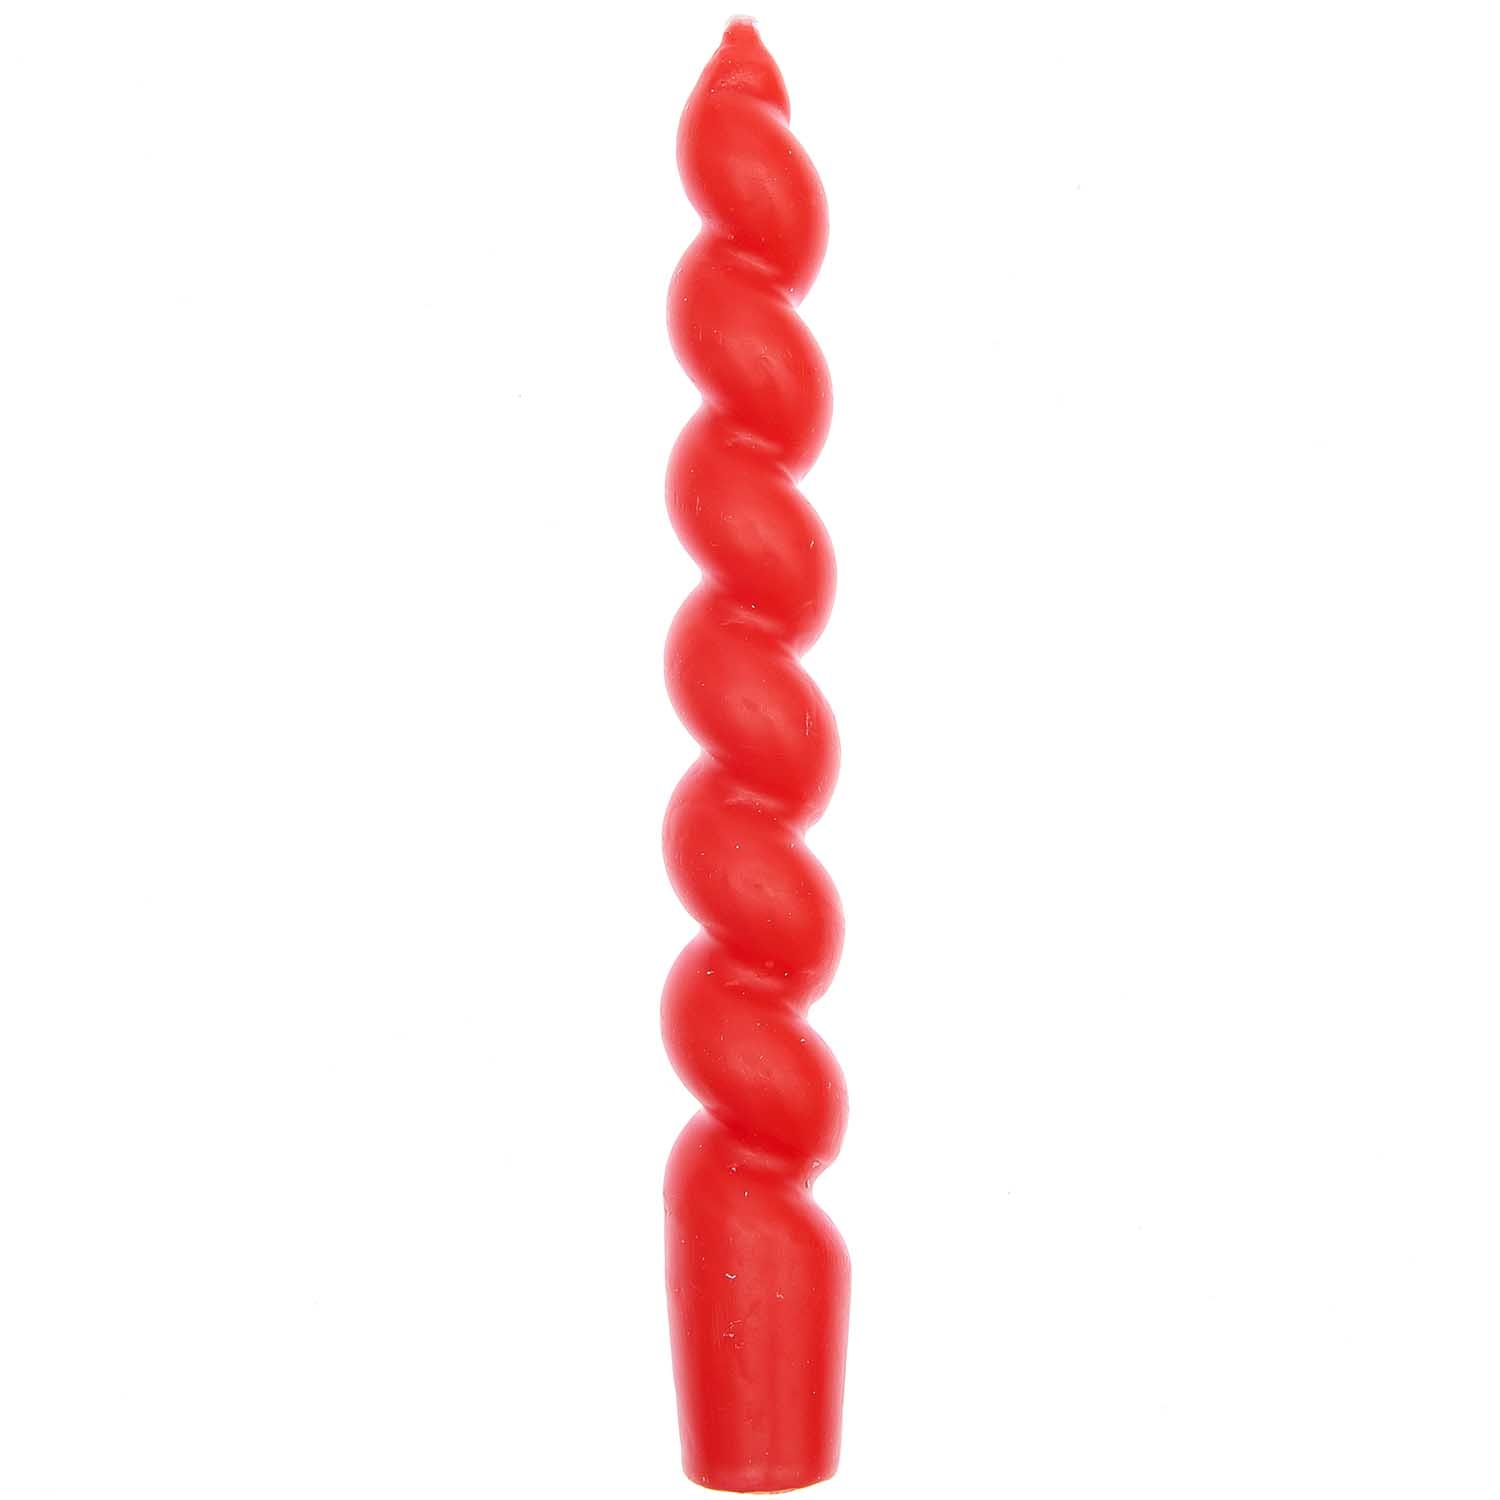 RICO Spiral candle, red, 1 pc, Ø 2,4 cm x 18,5 cm height